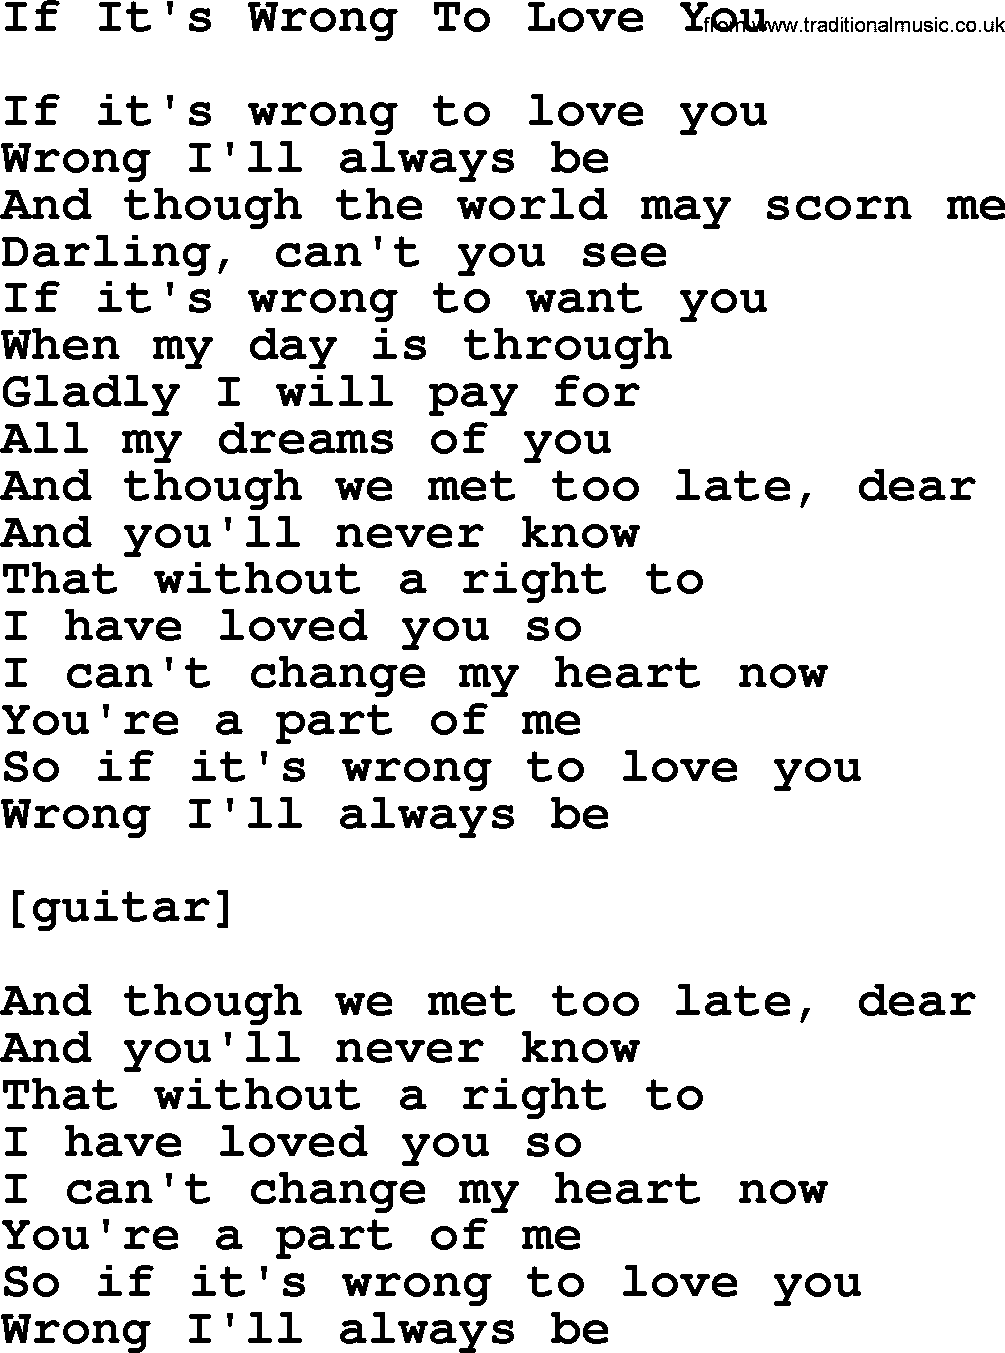 Willie Nelson song: If It's Wrong To Love You lyrics